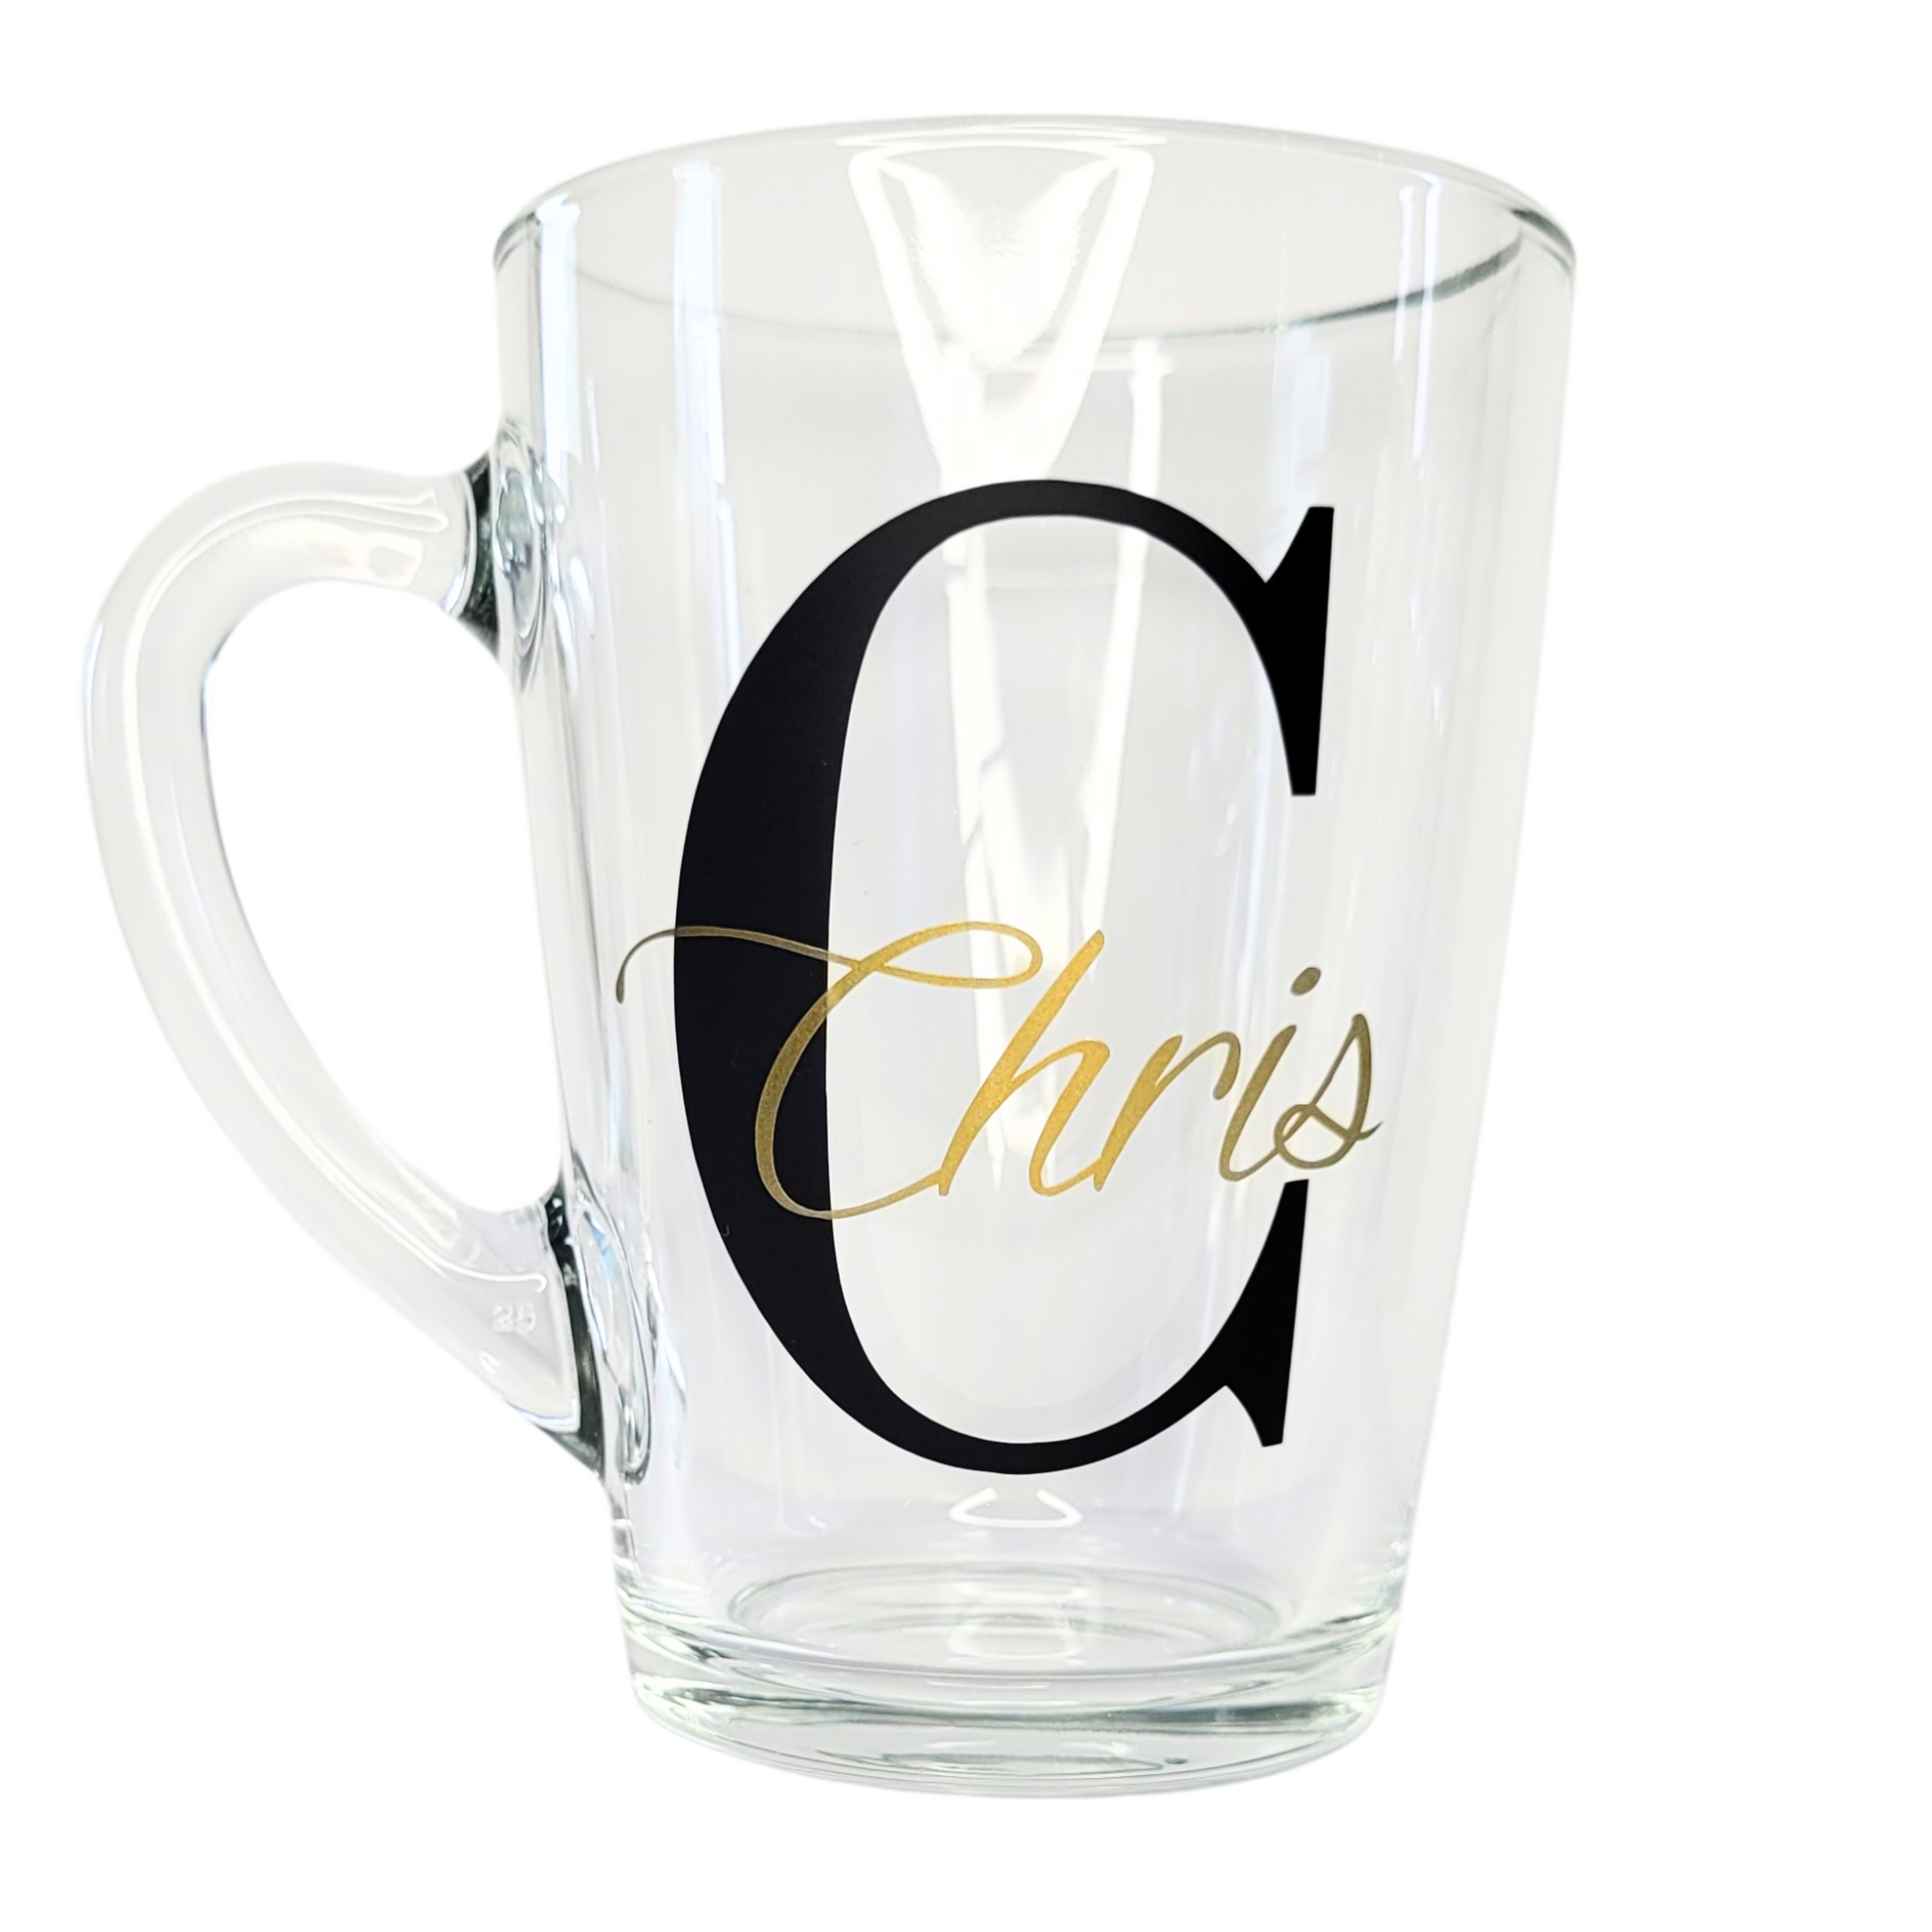 personalised glass mug. tempered glass. holds 320ml of liquid. black intital and gold written name. perfect for gifts